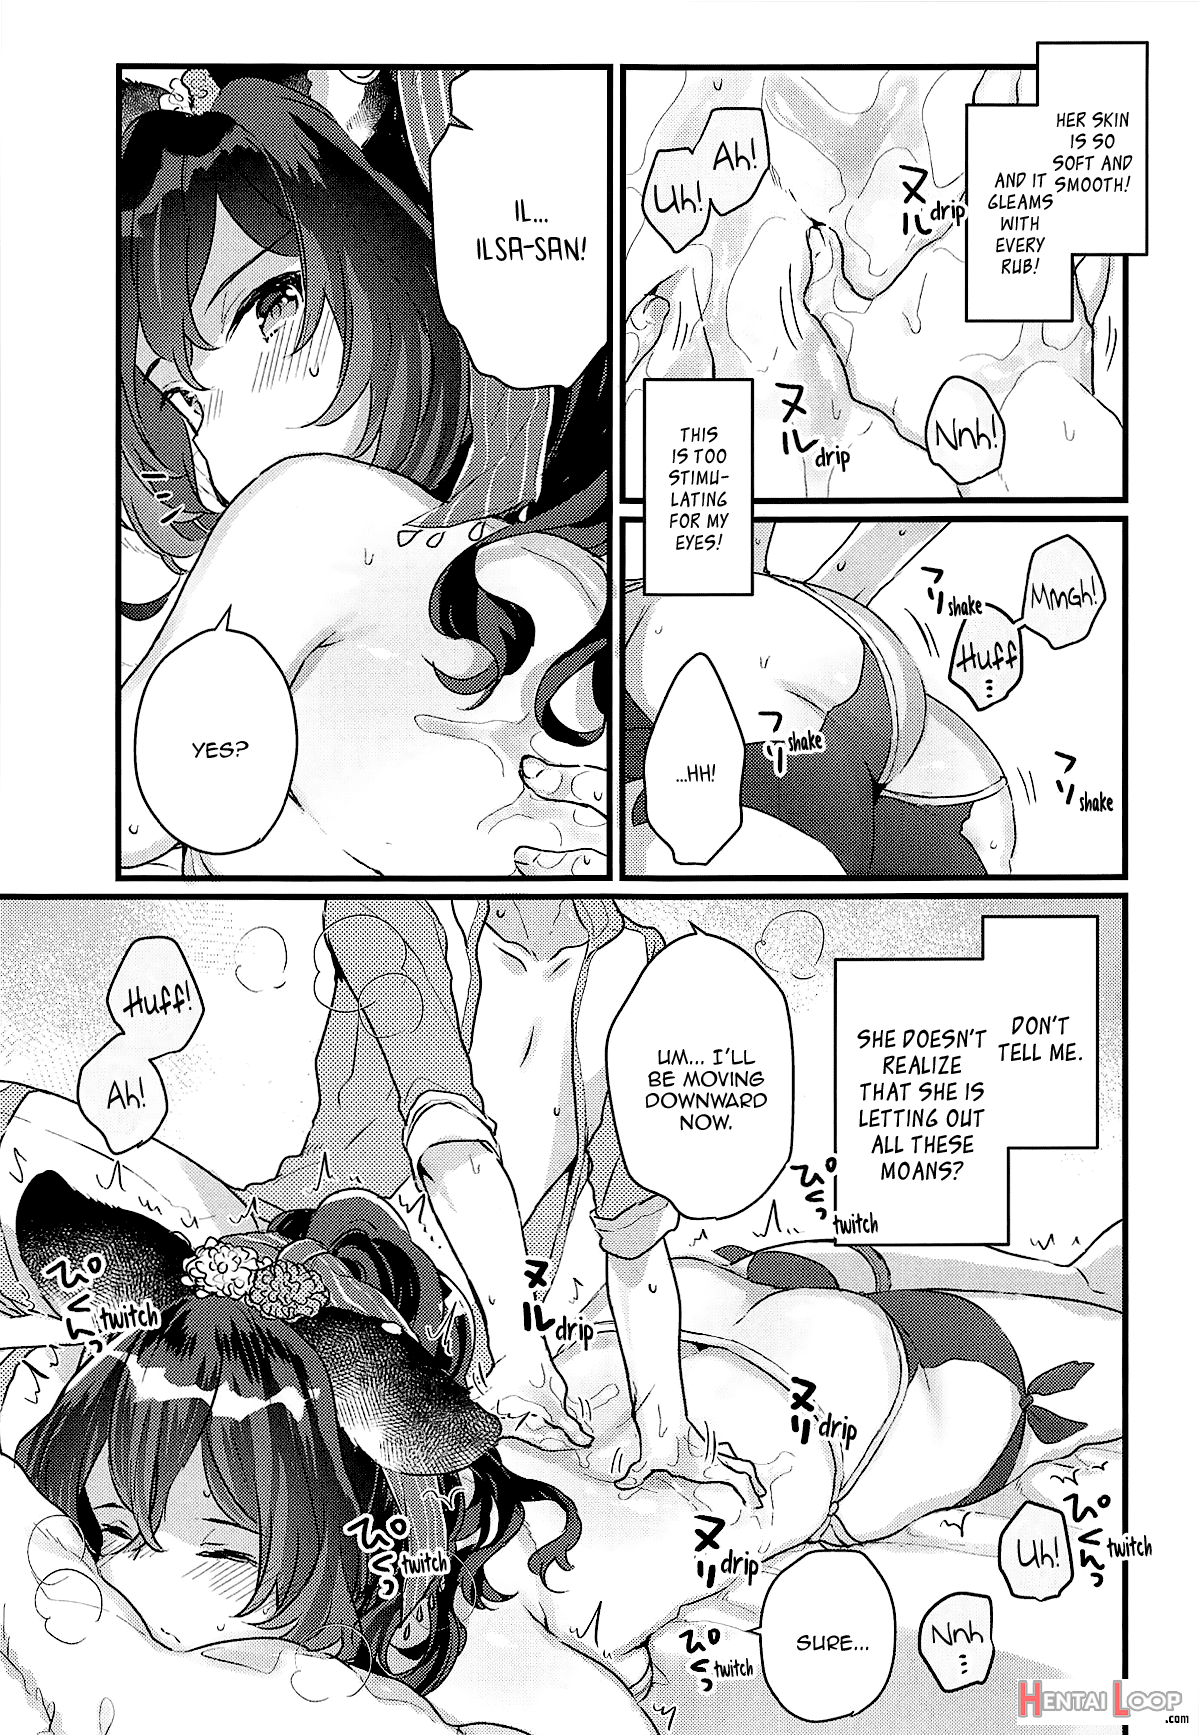 A Vacation To Auguste Isles With Ilsa-san page 9